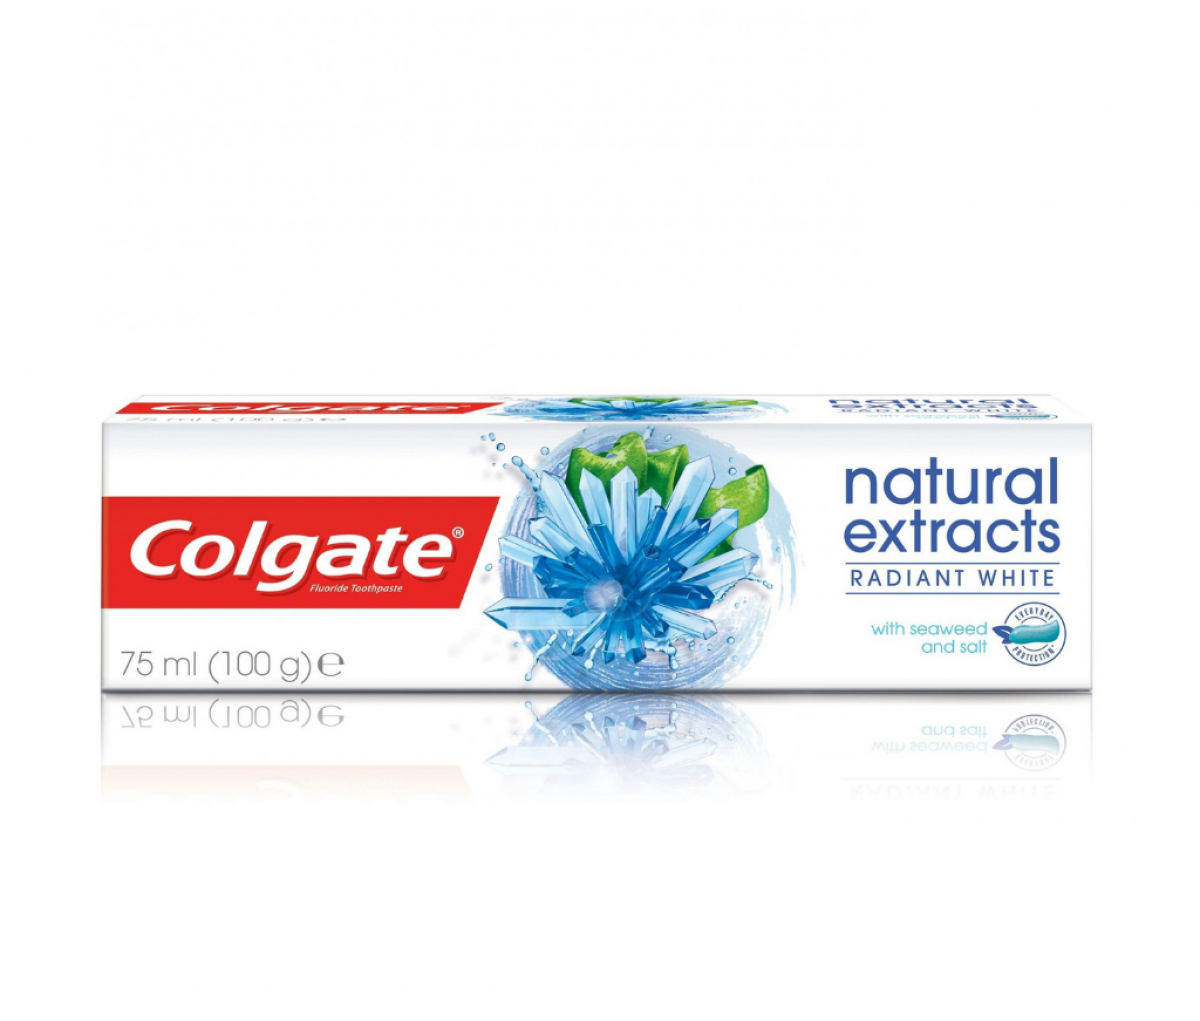 Colgate 75ml Natural Extracts Radiant White